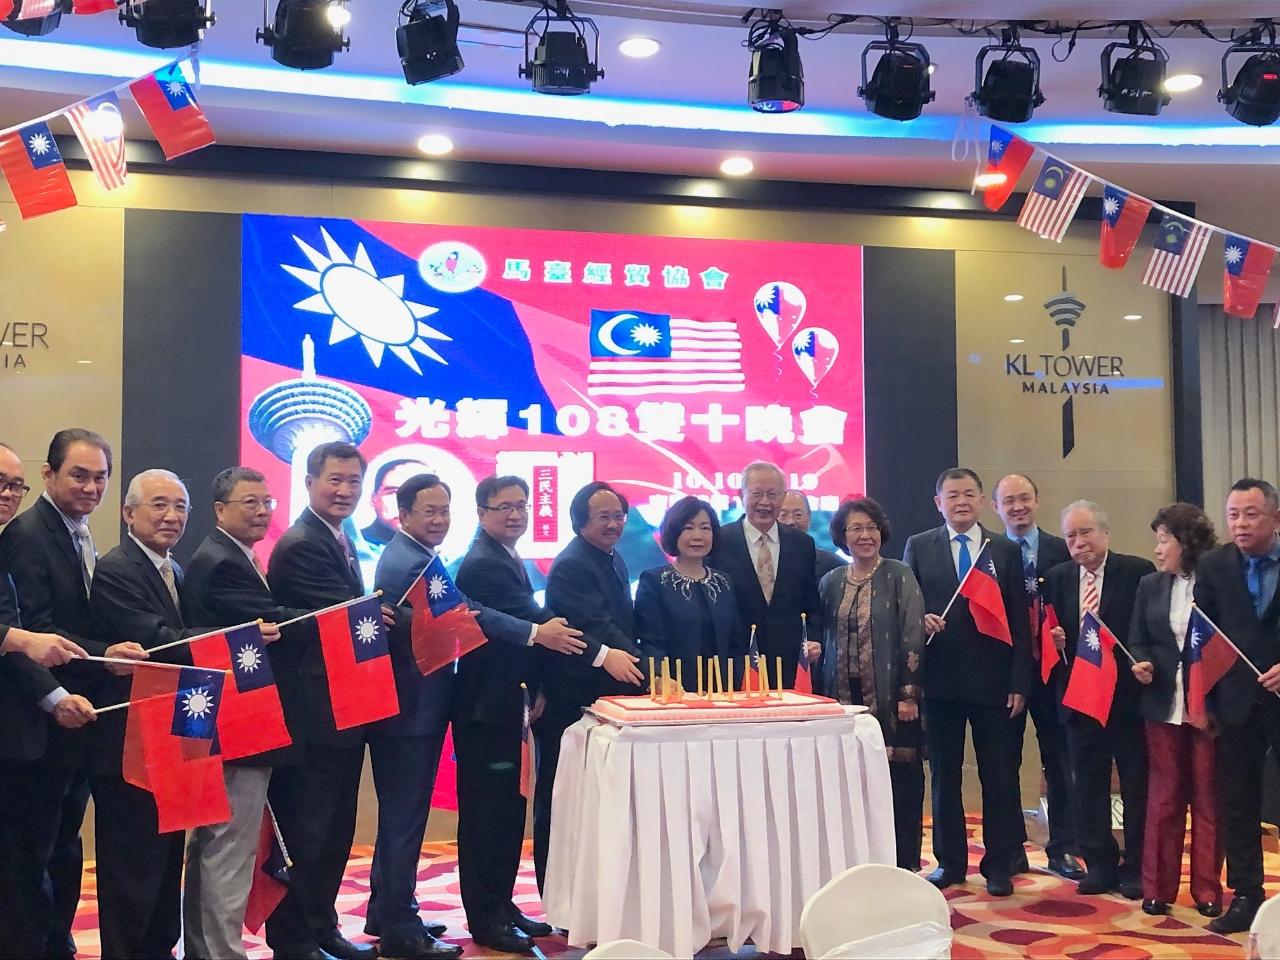 Representative Anne Hung (eighth from right) celebrates the National Day of the Republic of China by cutting the cake with the distinguished guests.
